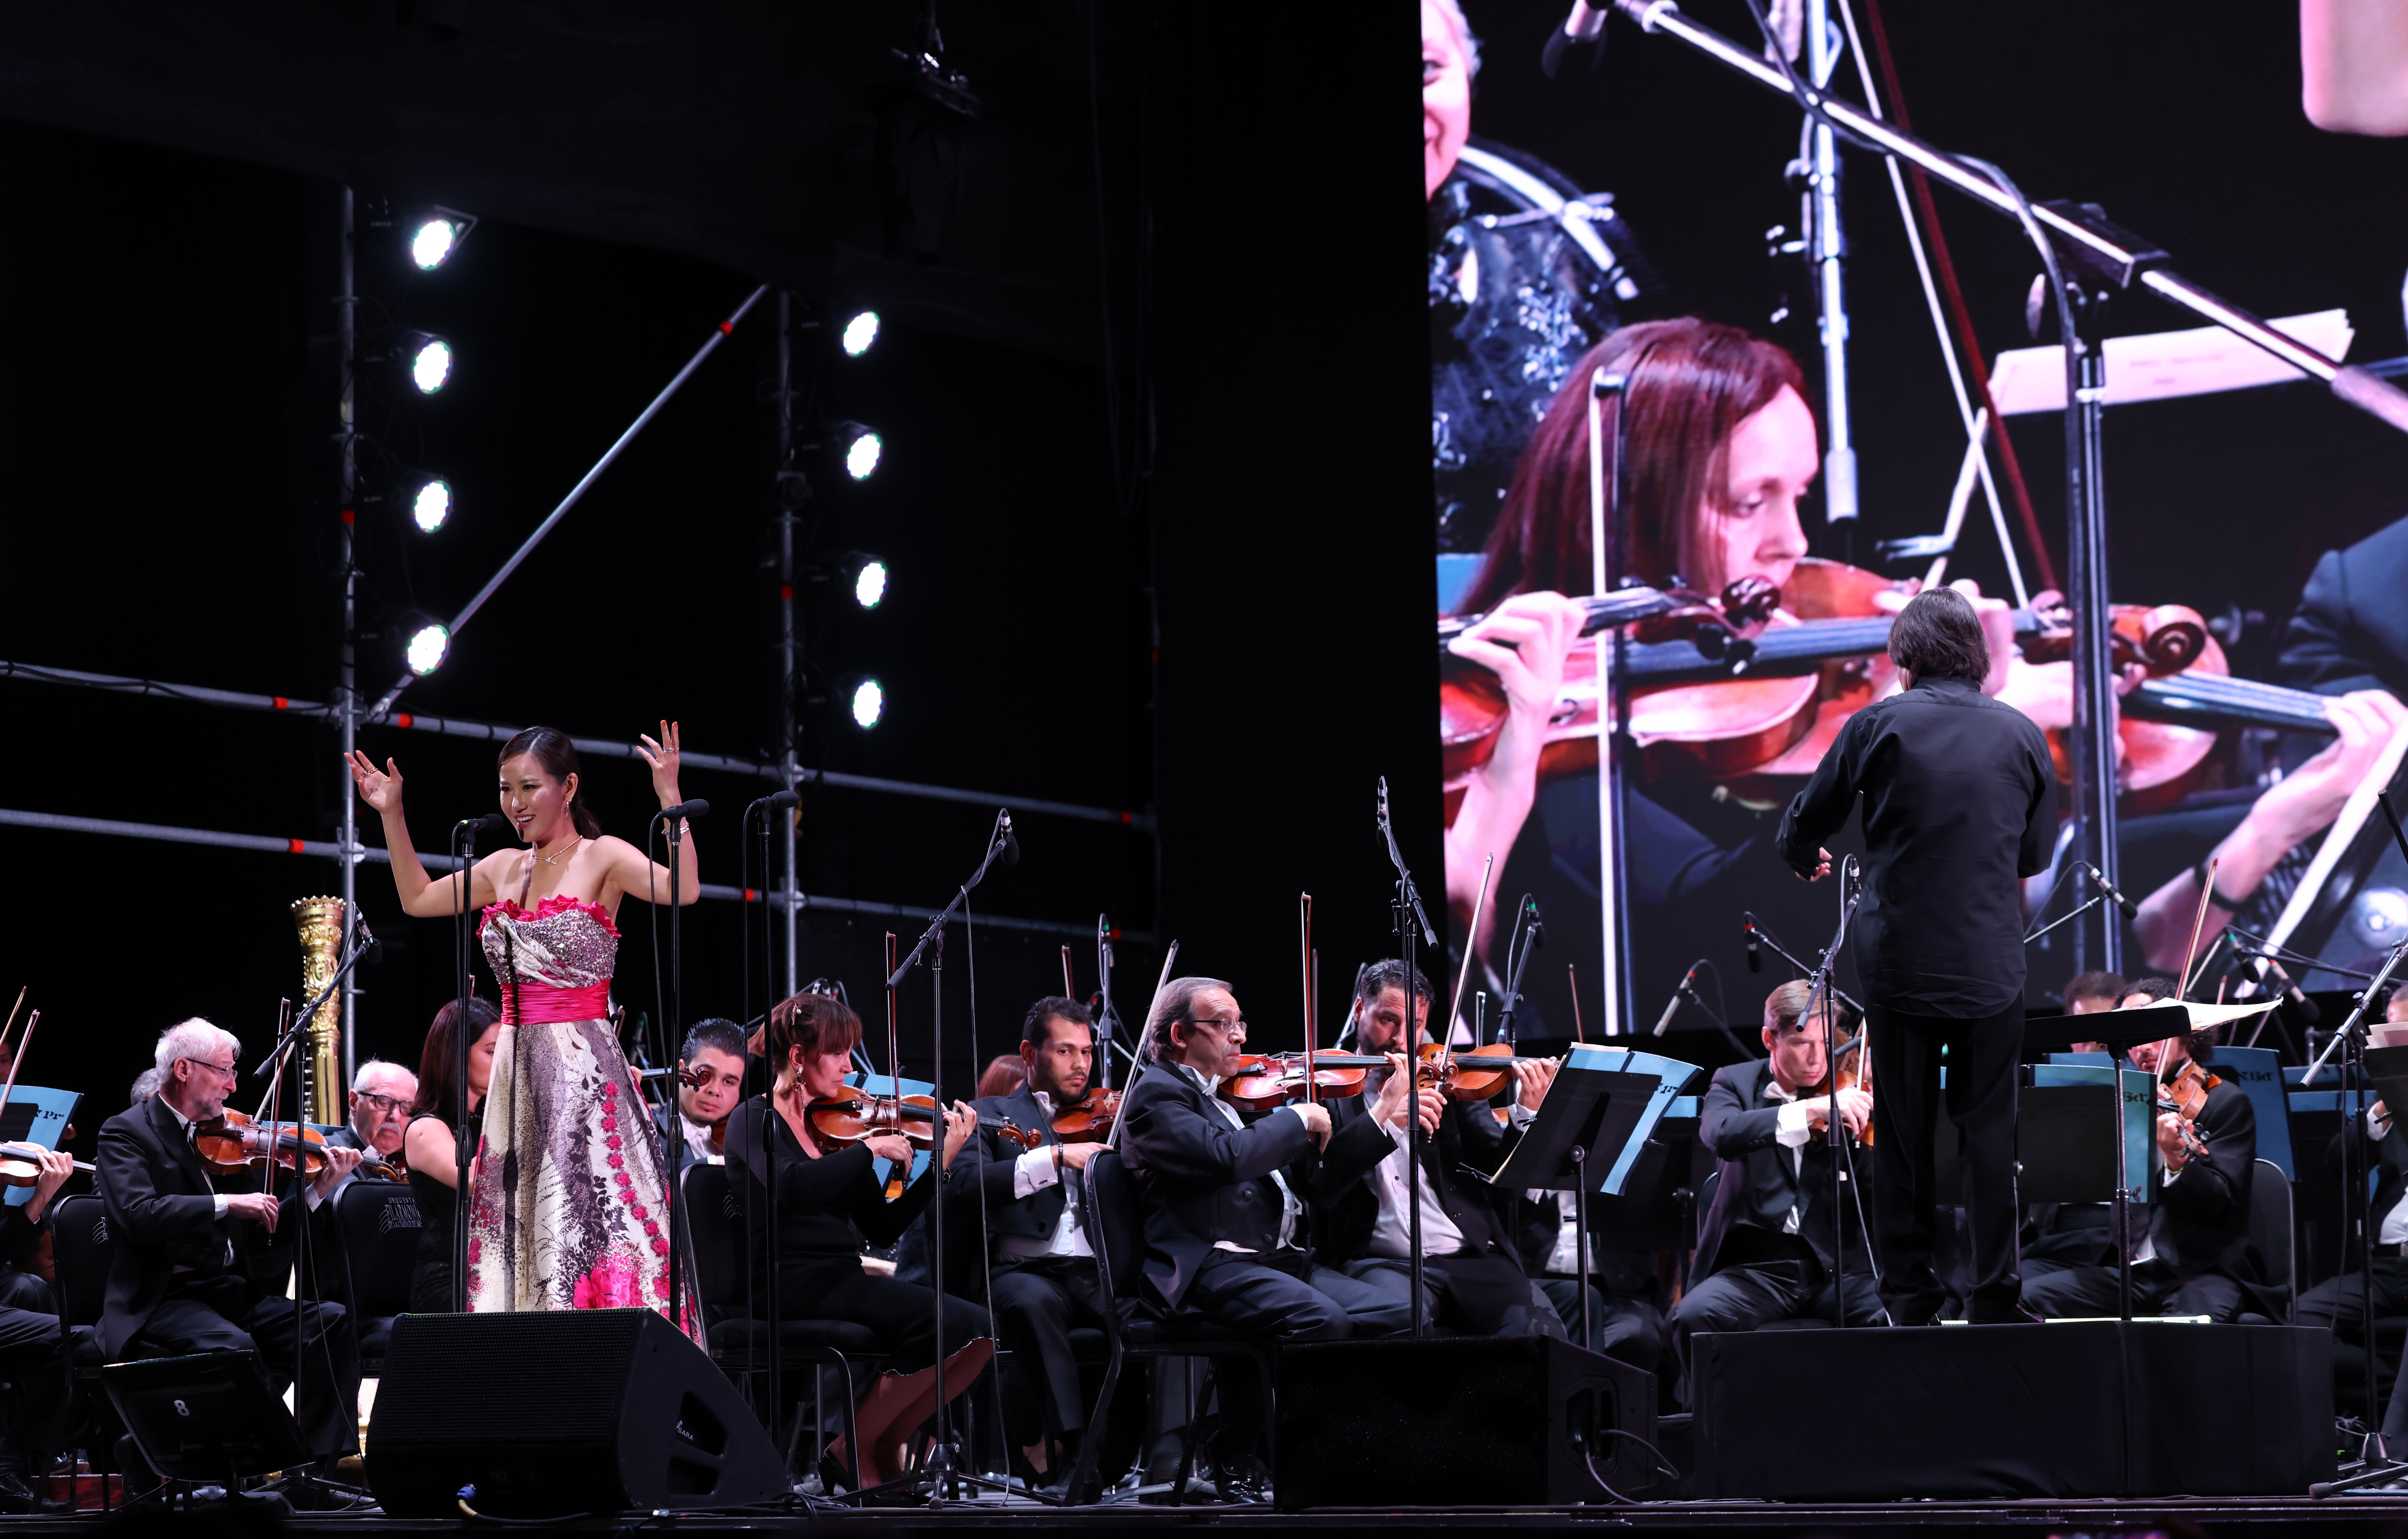 Soprano Hera Hyesang Park on Oct. 12 performs at the opening ceremony of the Festival Internacional Cervantino (International Cervantino Festival) in Guanajuato, Mexico.